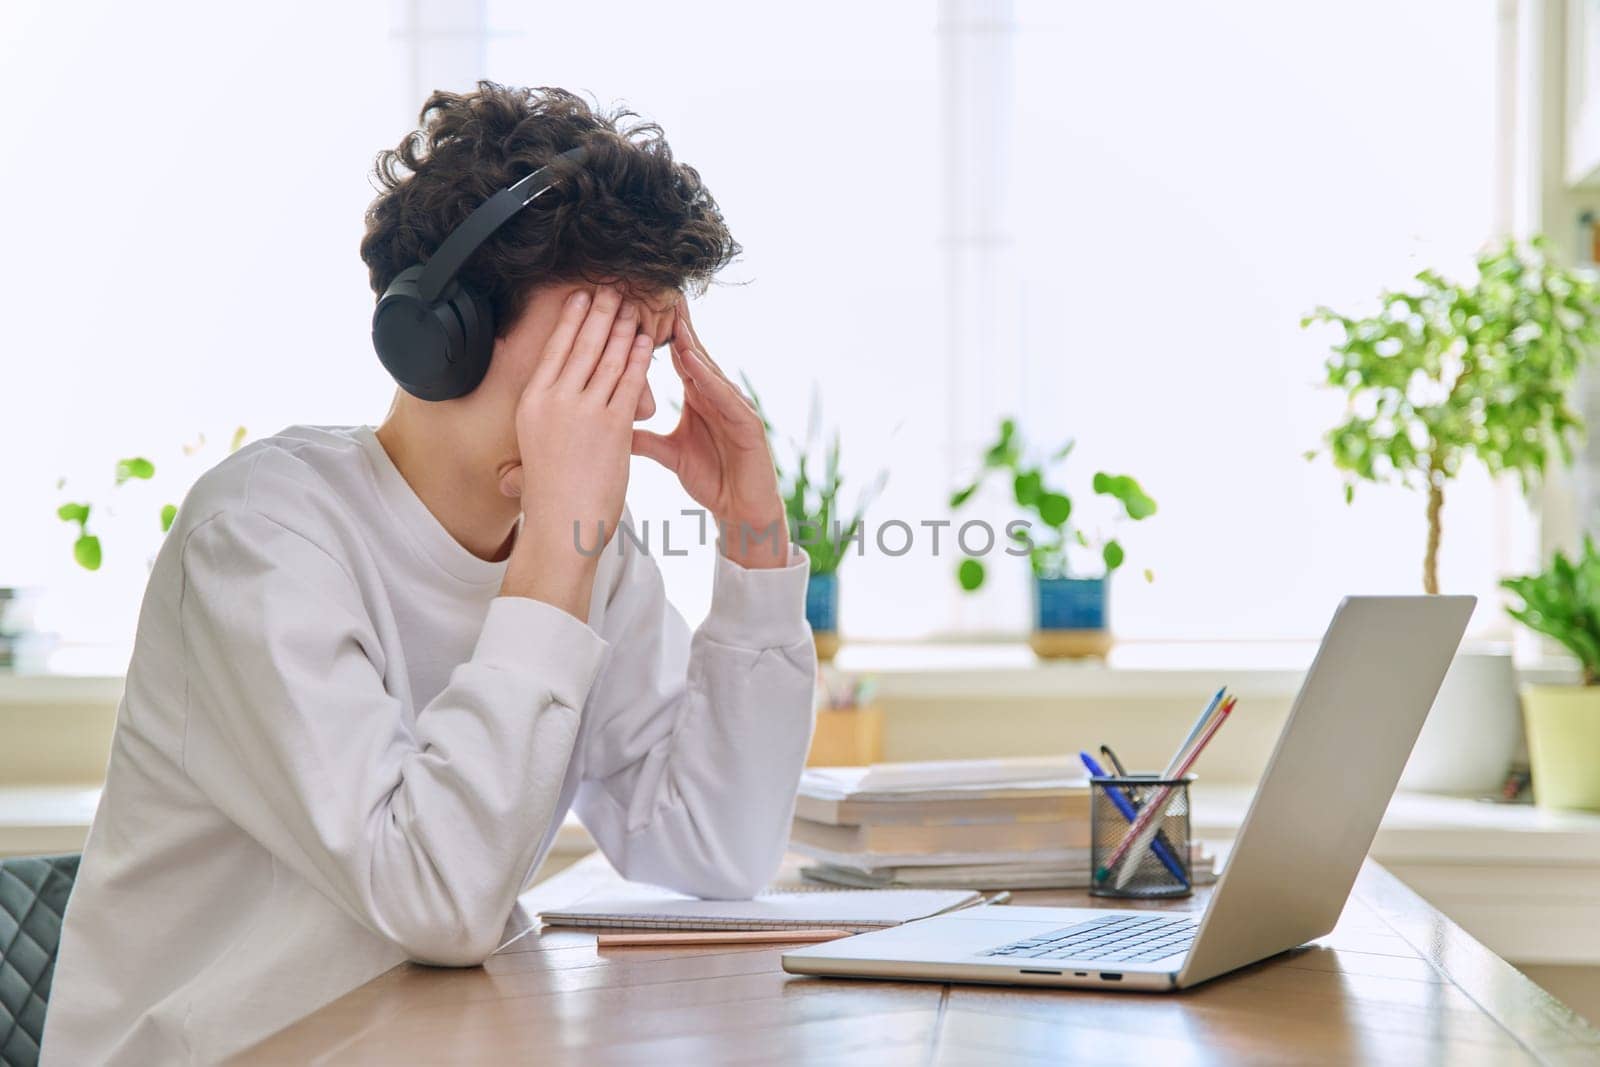 Sad upset young guy student in headphones sitting at home at desk with computer laptop, touching head with hands. Problems headaches troubles in college difficulties in study mental stress depression